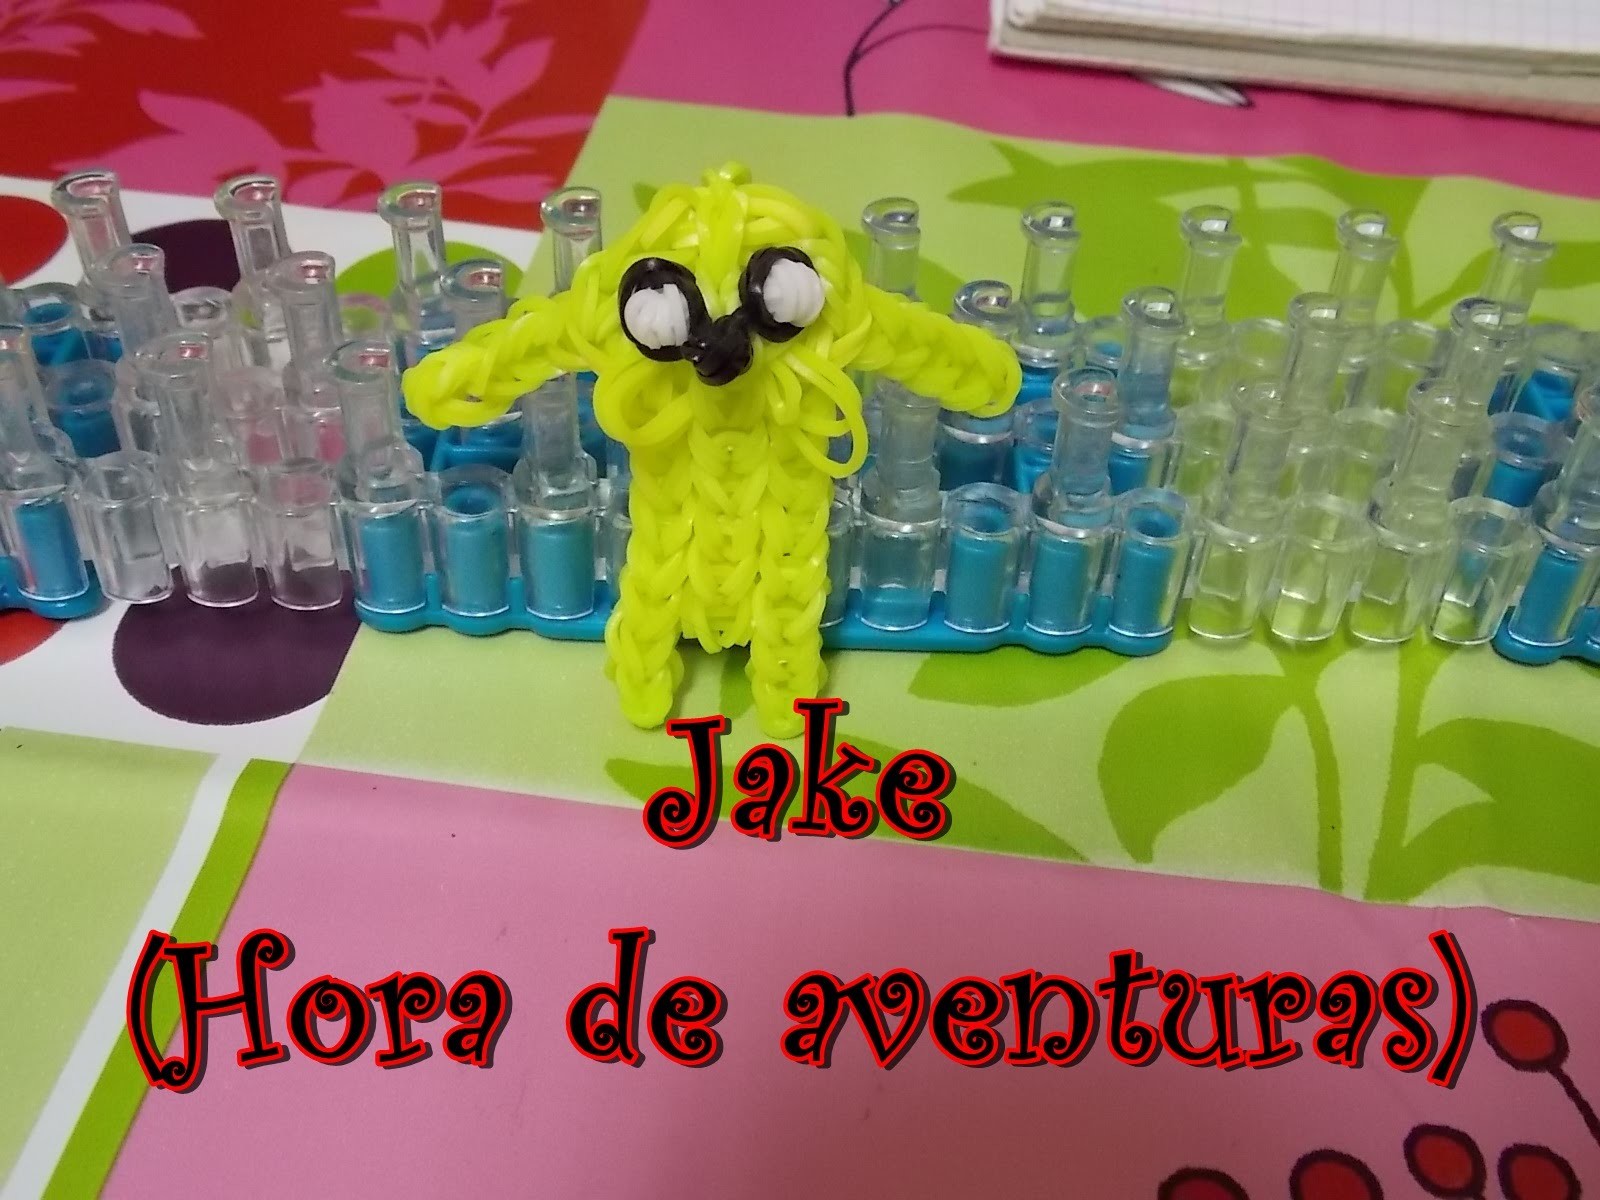 who is the voice actor for jake in adventure time